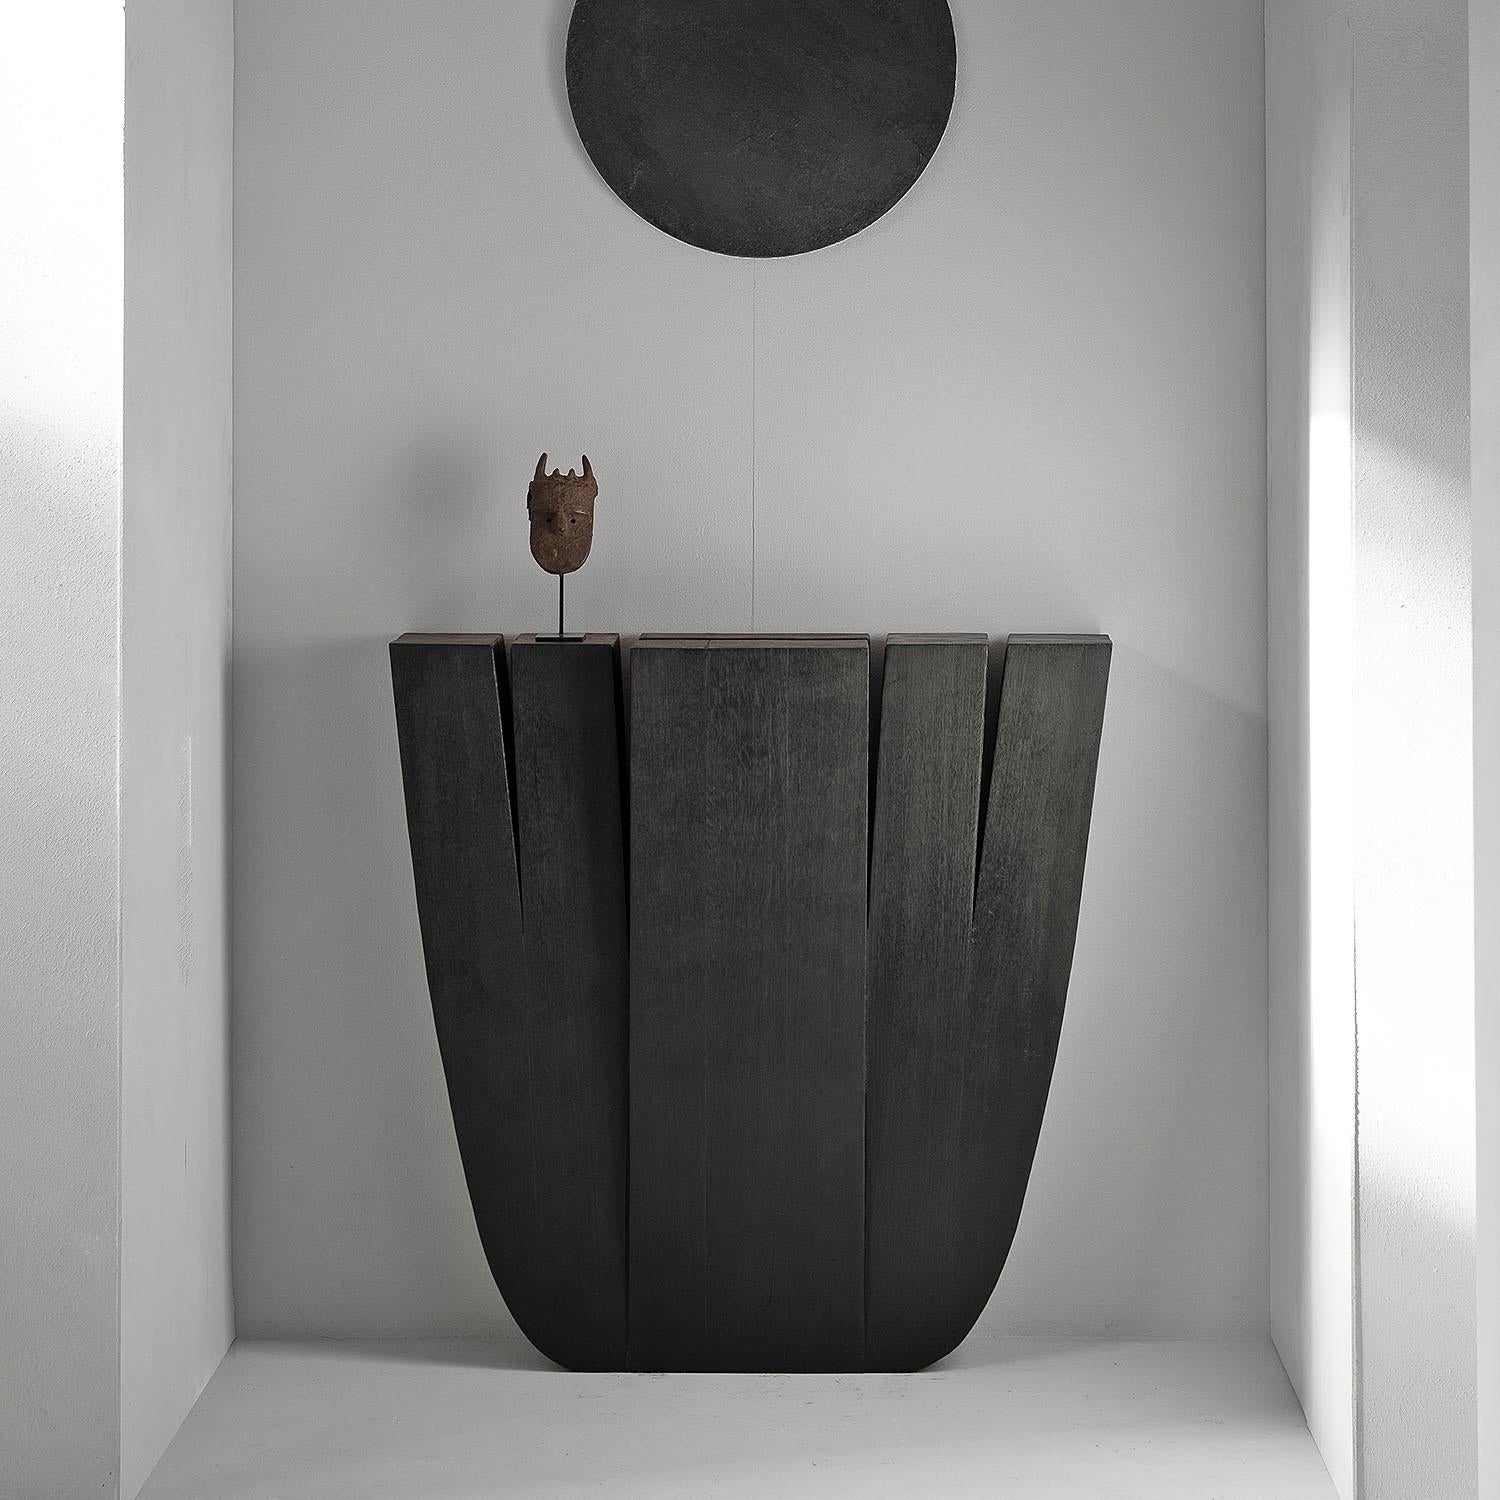 Contemporary black console in iroko wood - hallway table by Arno Declercq

Dimensions:
90 cm L x 25 cm W x 90 cm H
35.5” L x 9.8” W x 35.5” H

Material: Iroko wood

Made by hand, in Belgium.

Arno Declercq
Belgian designer and art dealer